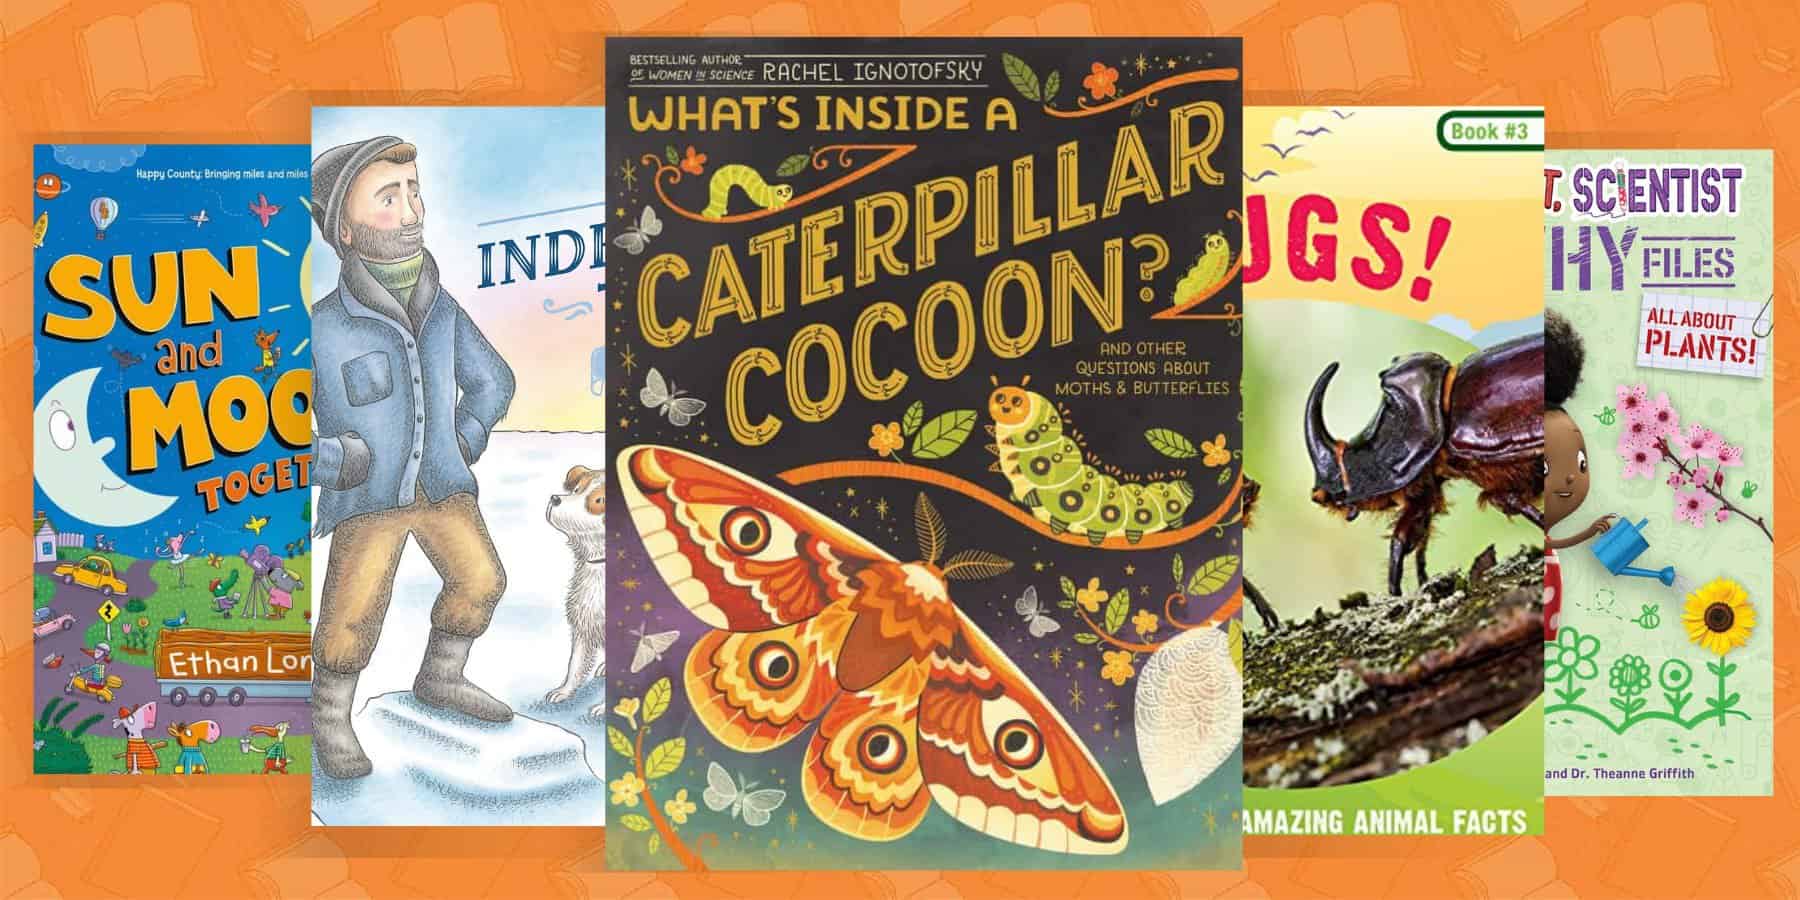 35 Excellent Nonfiction Books for 2nd Graders (7 Year Olds)